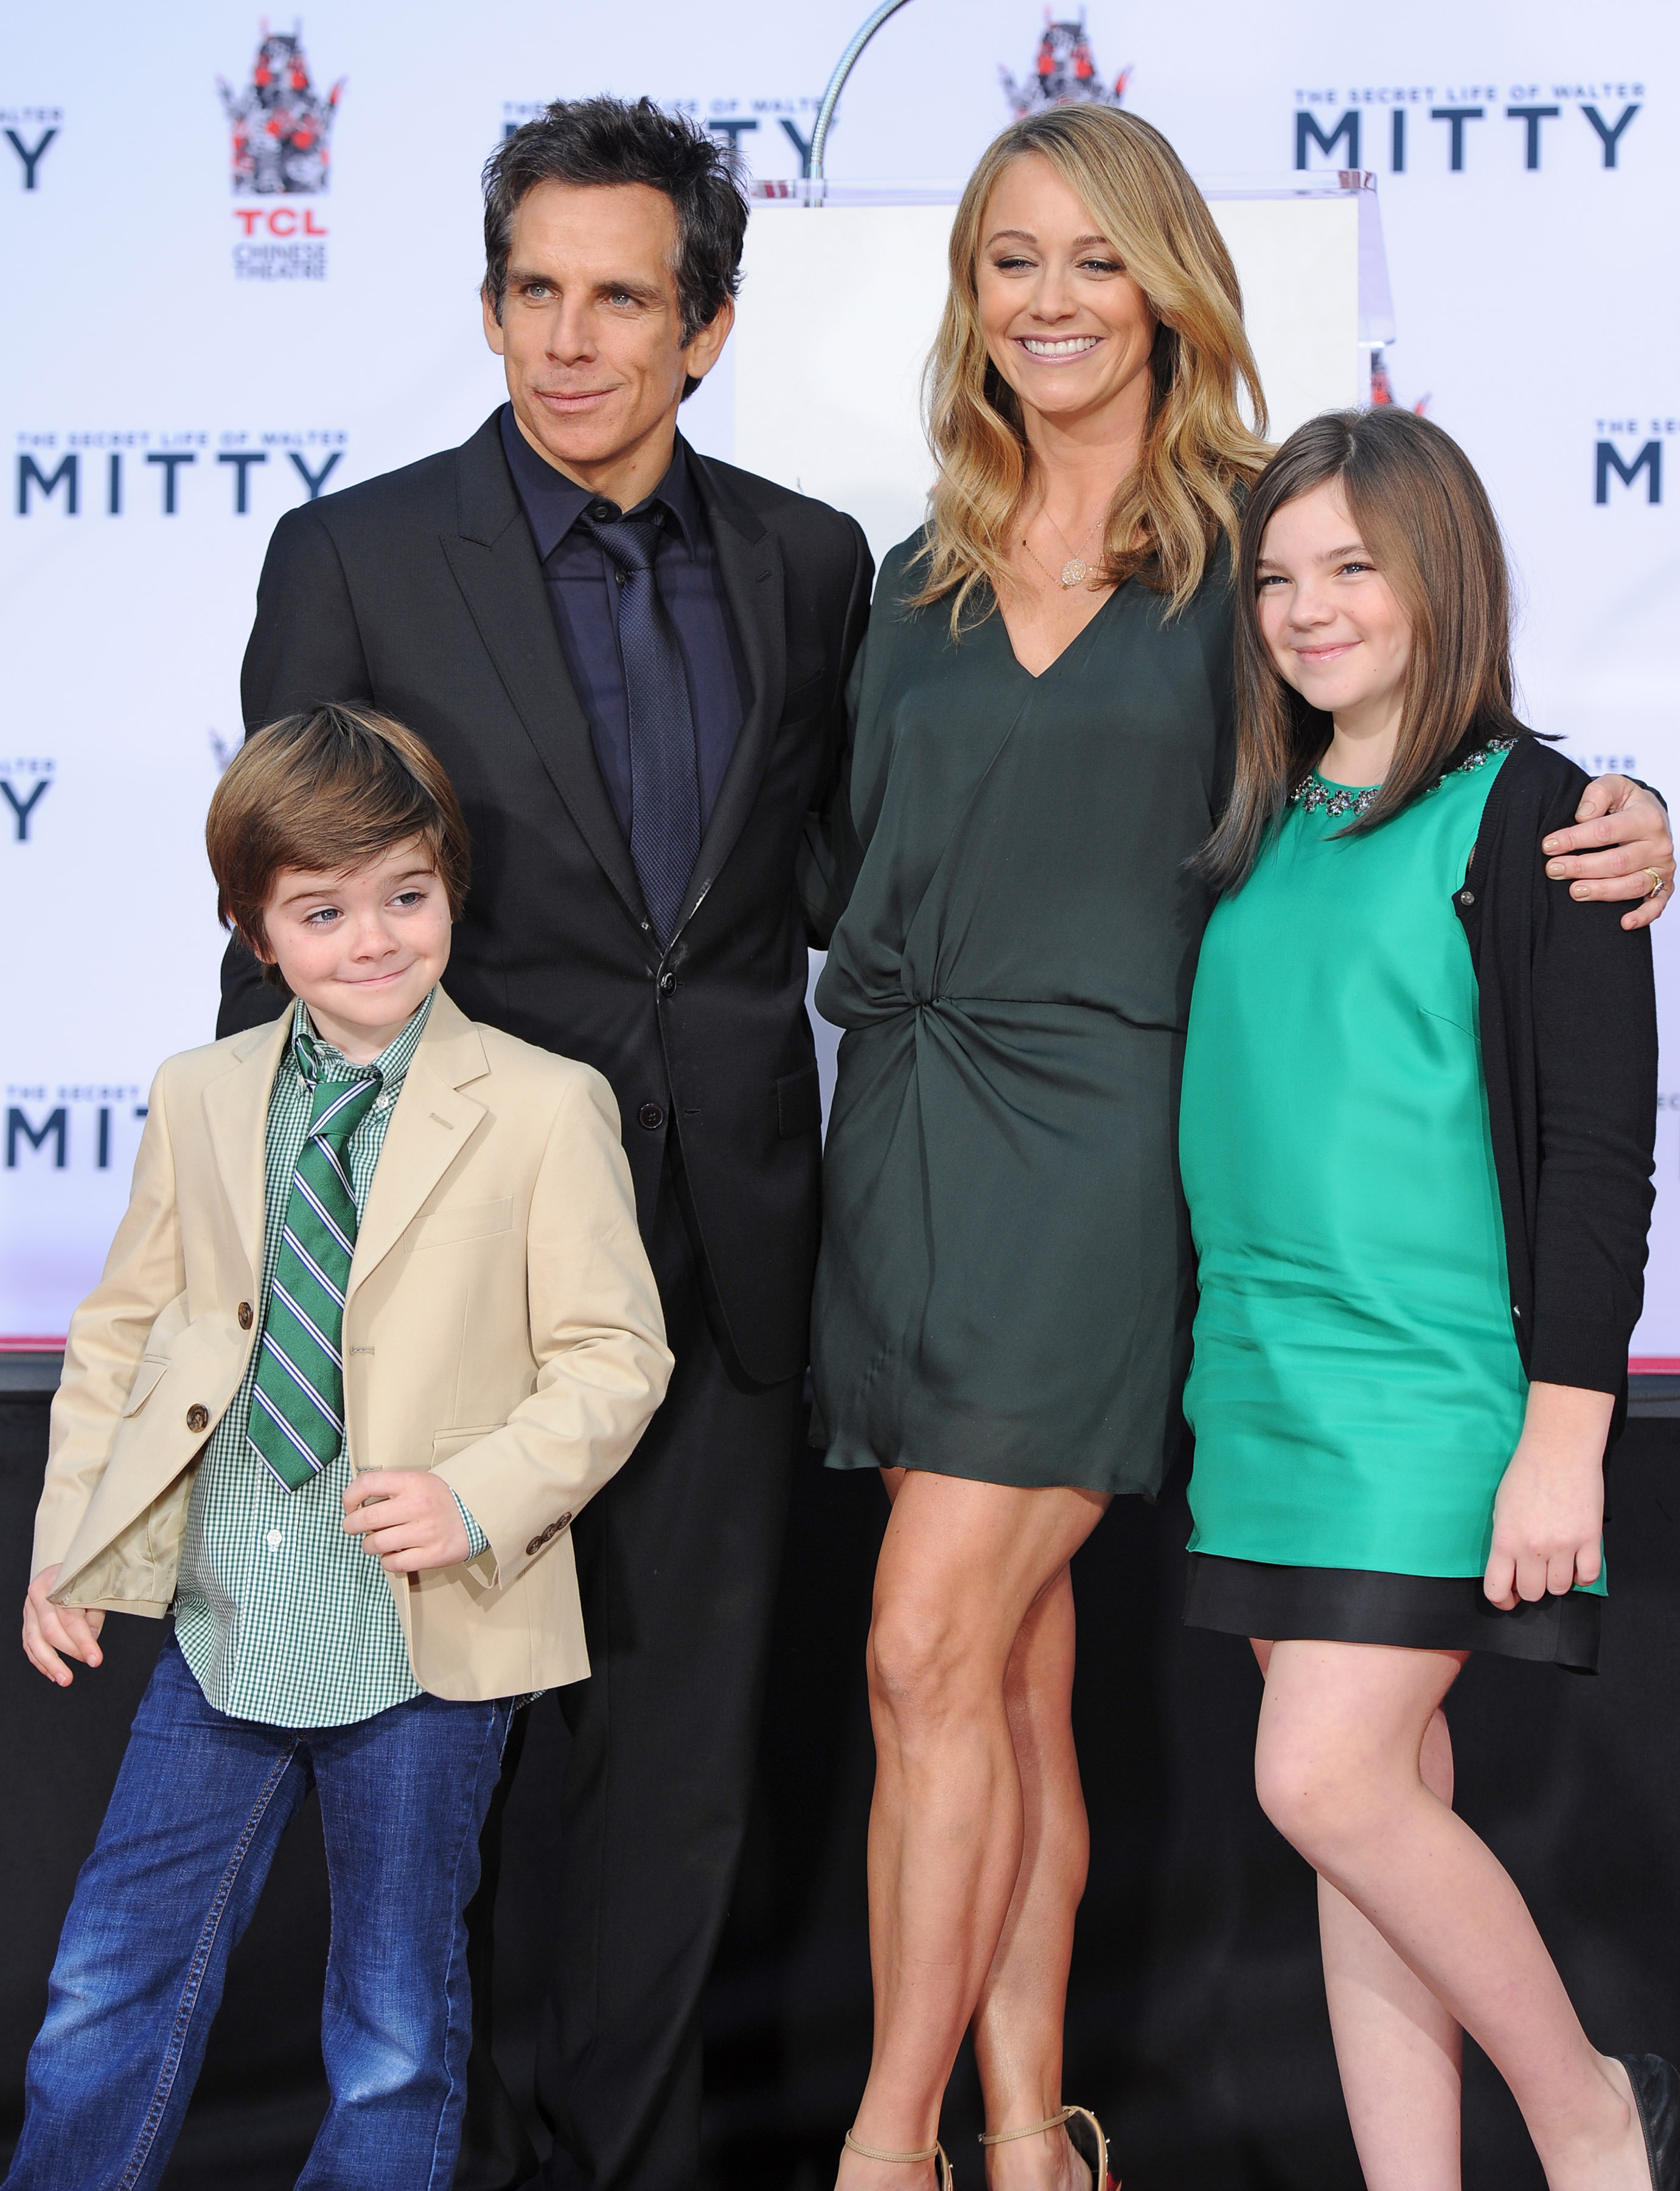 Ben Stiller & Christine Taylor with their children Quinlin and Ella at the hand and footprint ceremony honoring Ben Stiller at TCL Chinese Theatre on December 3, 2013 in Hollywood, California | Source: Getty Images